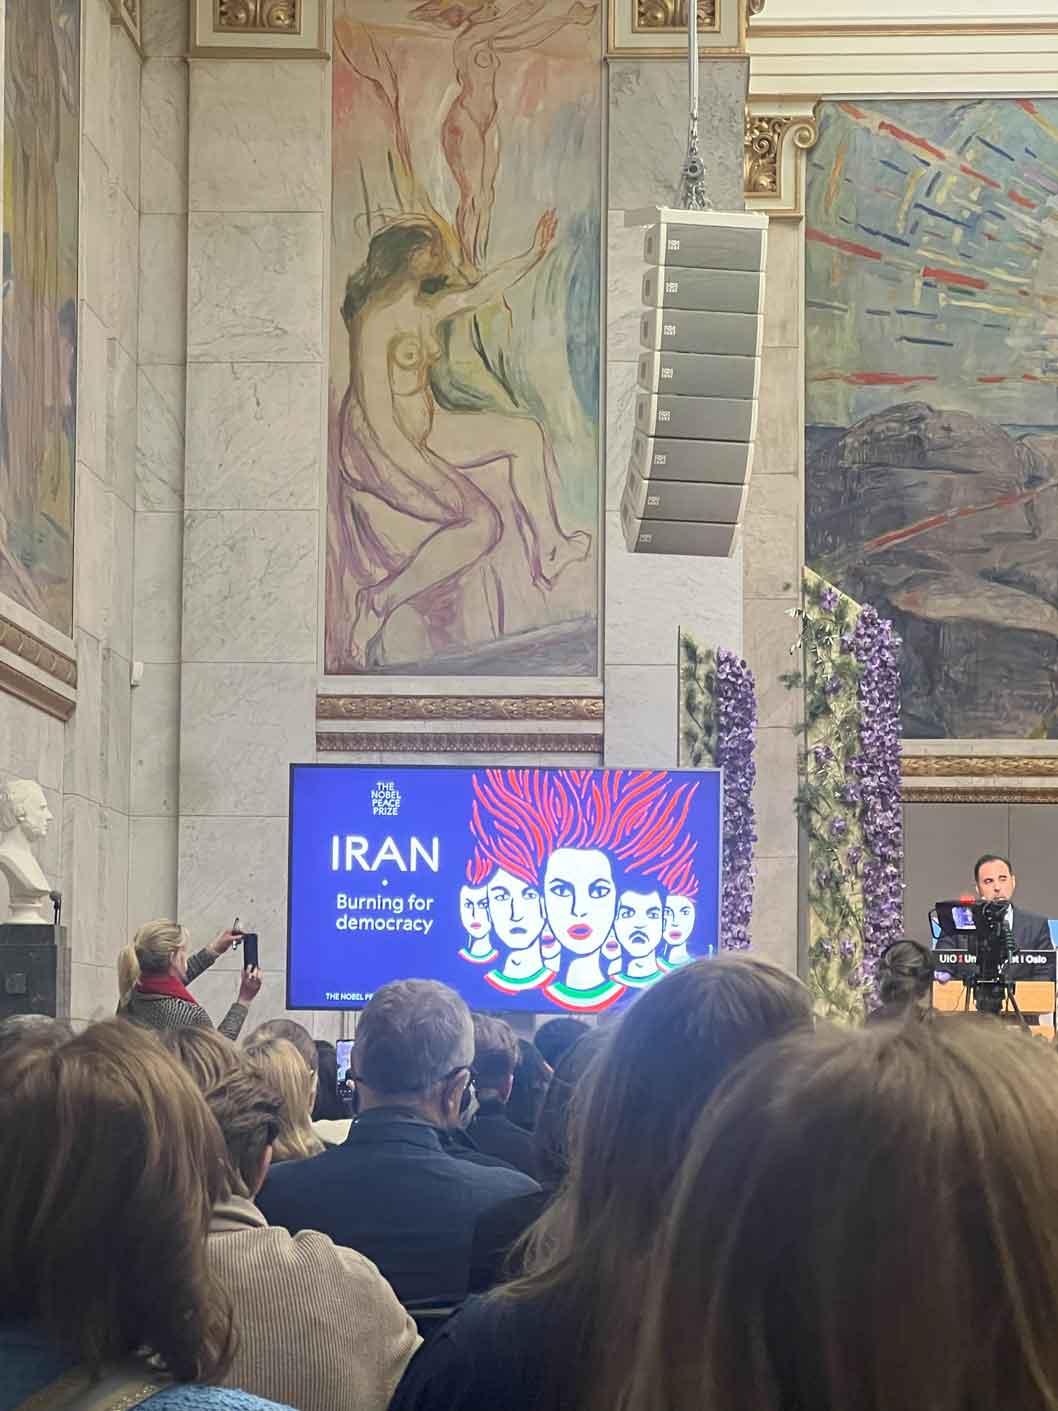 Inside musuem showing a promotional screen for IRAN